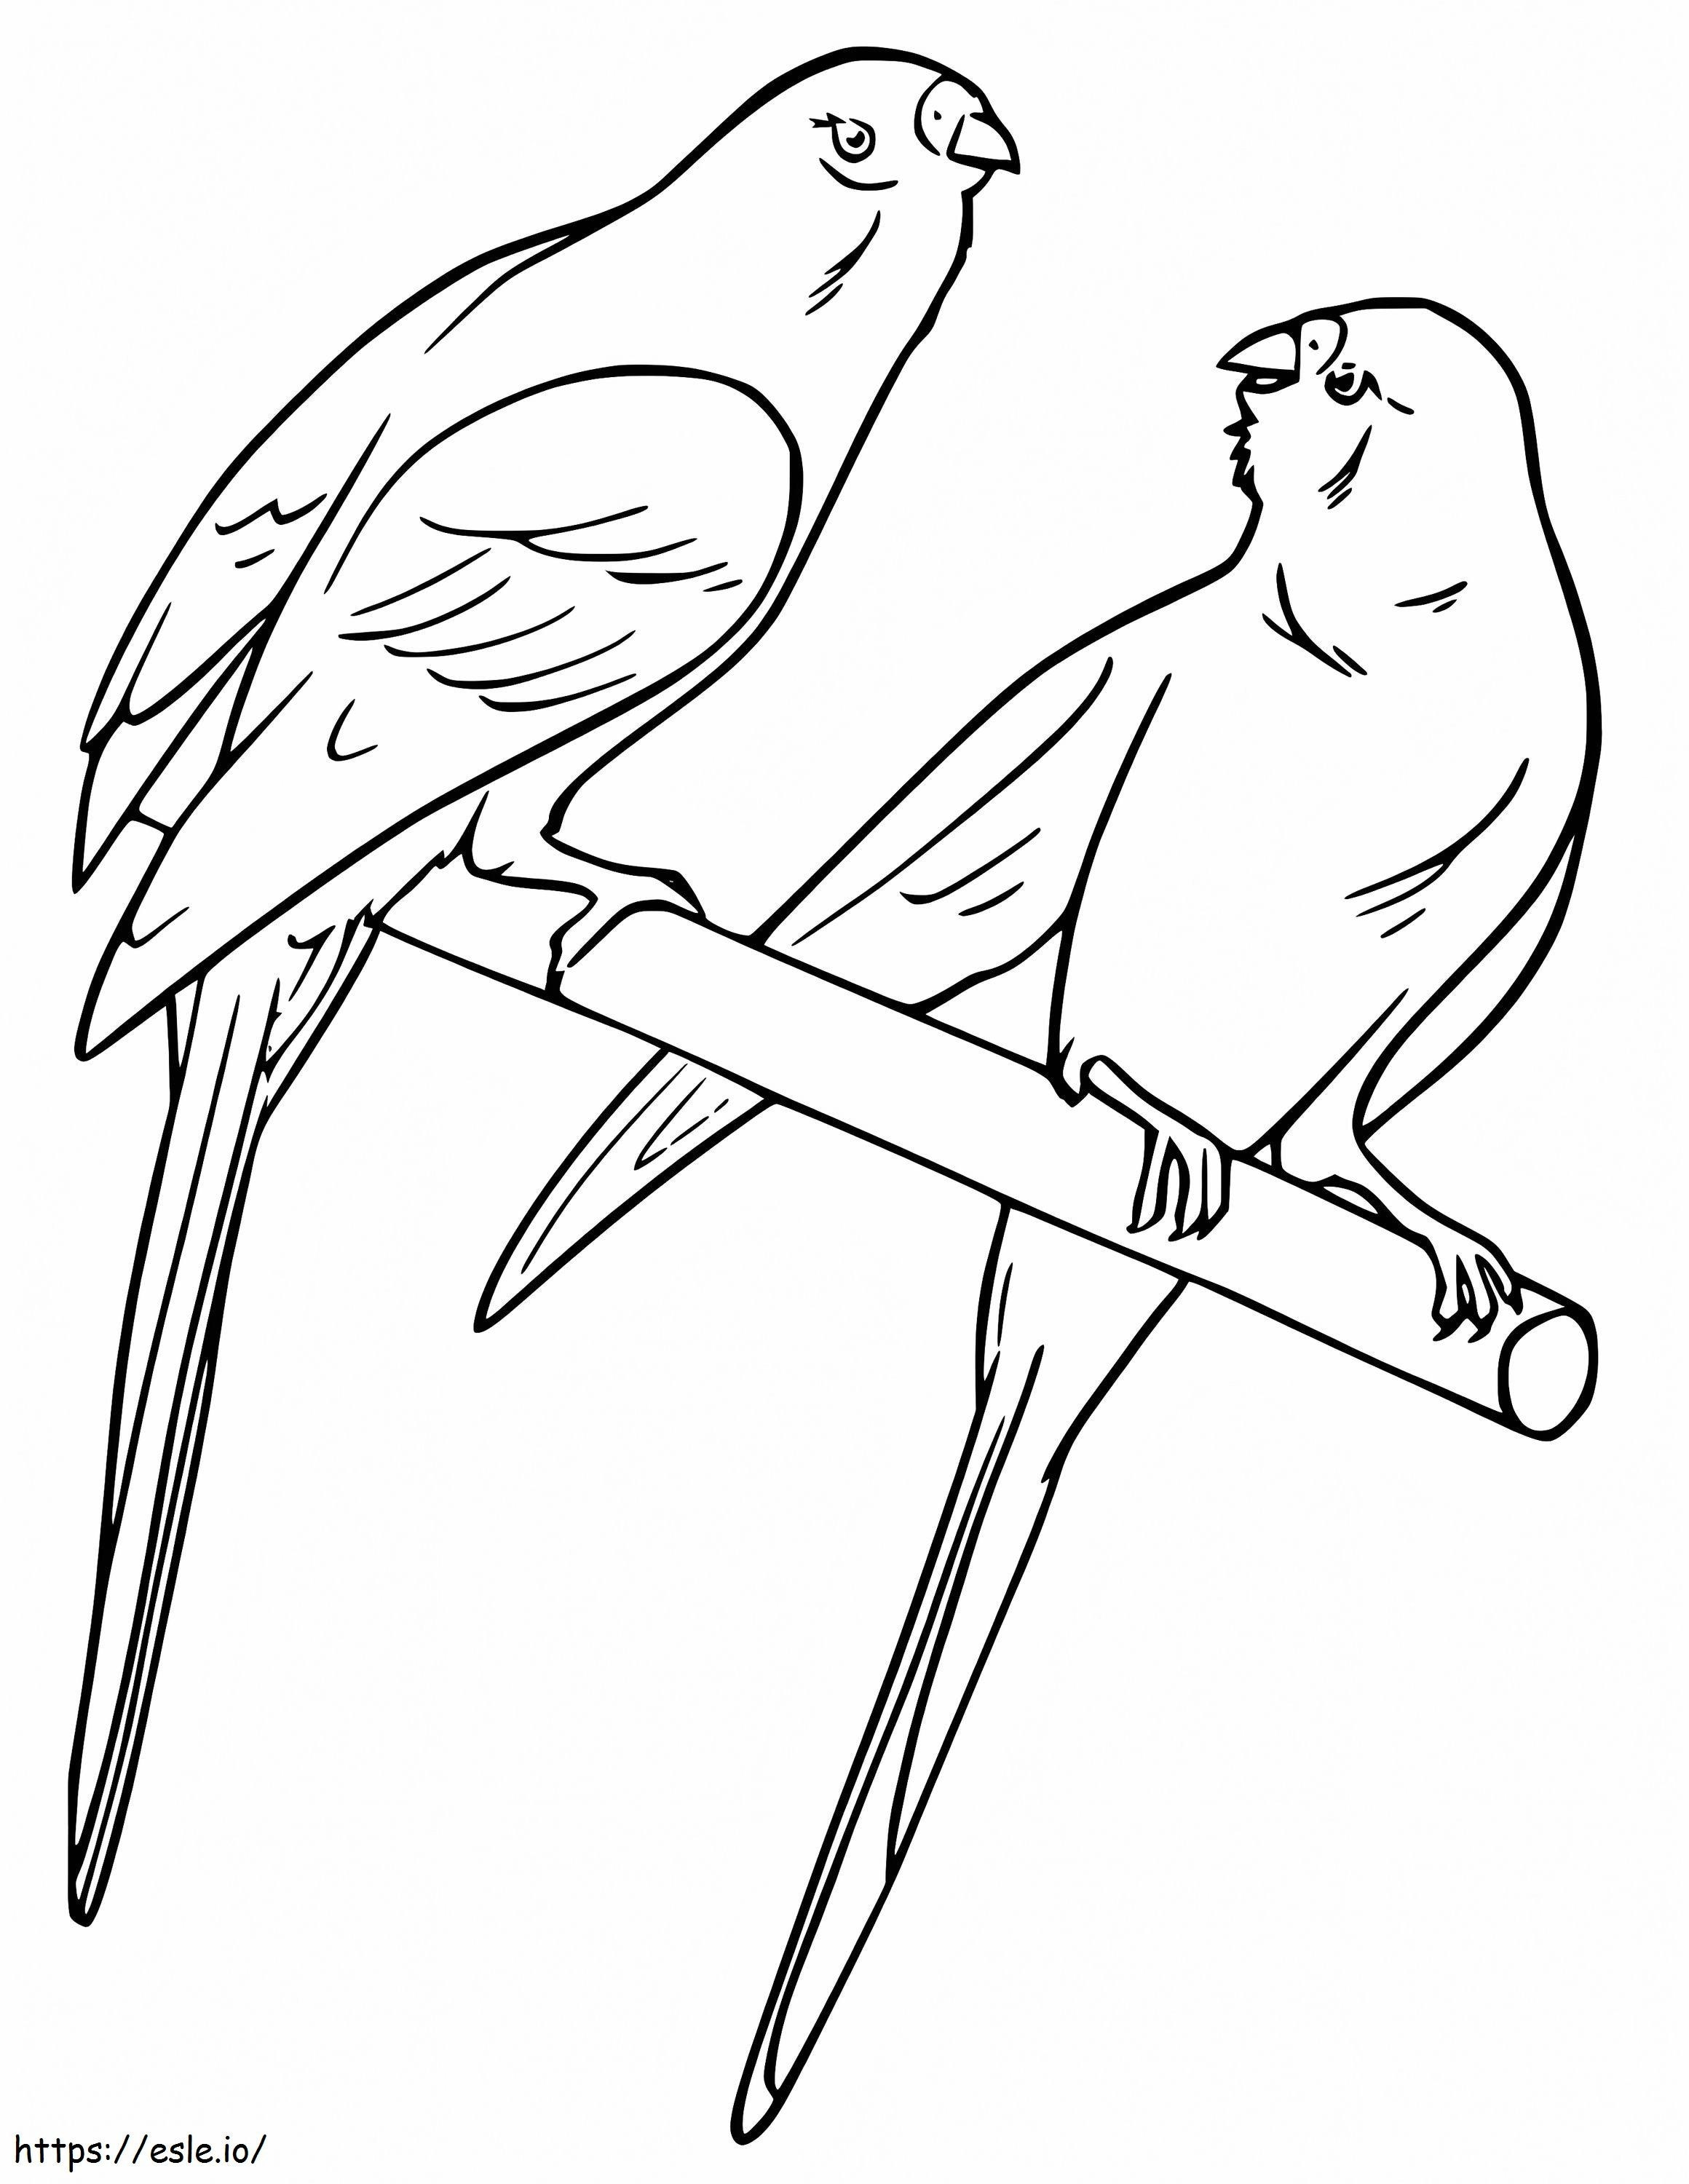 Parakeets coloring page